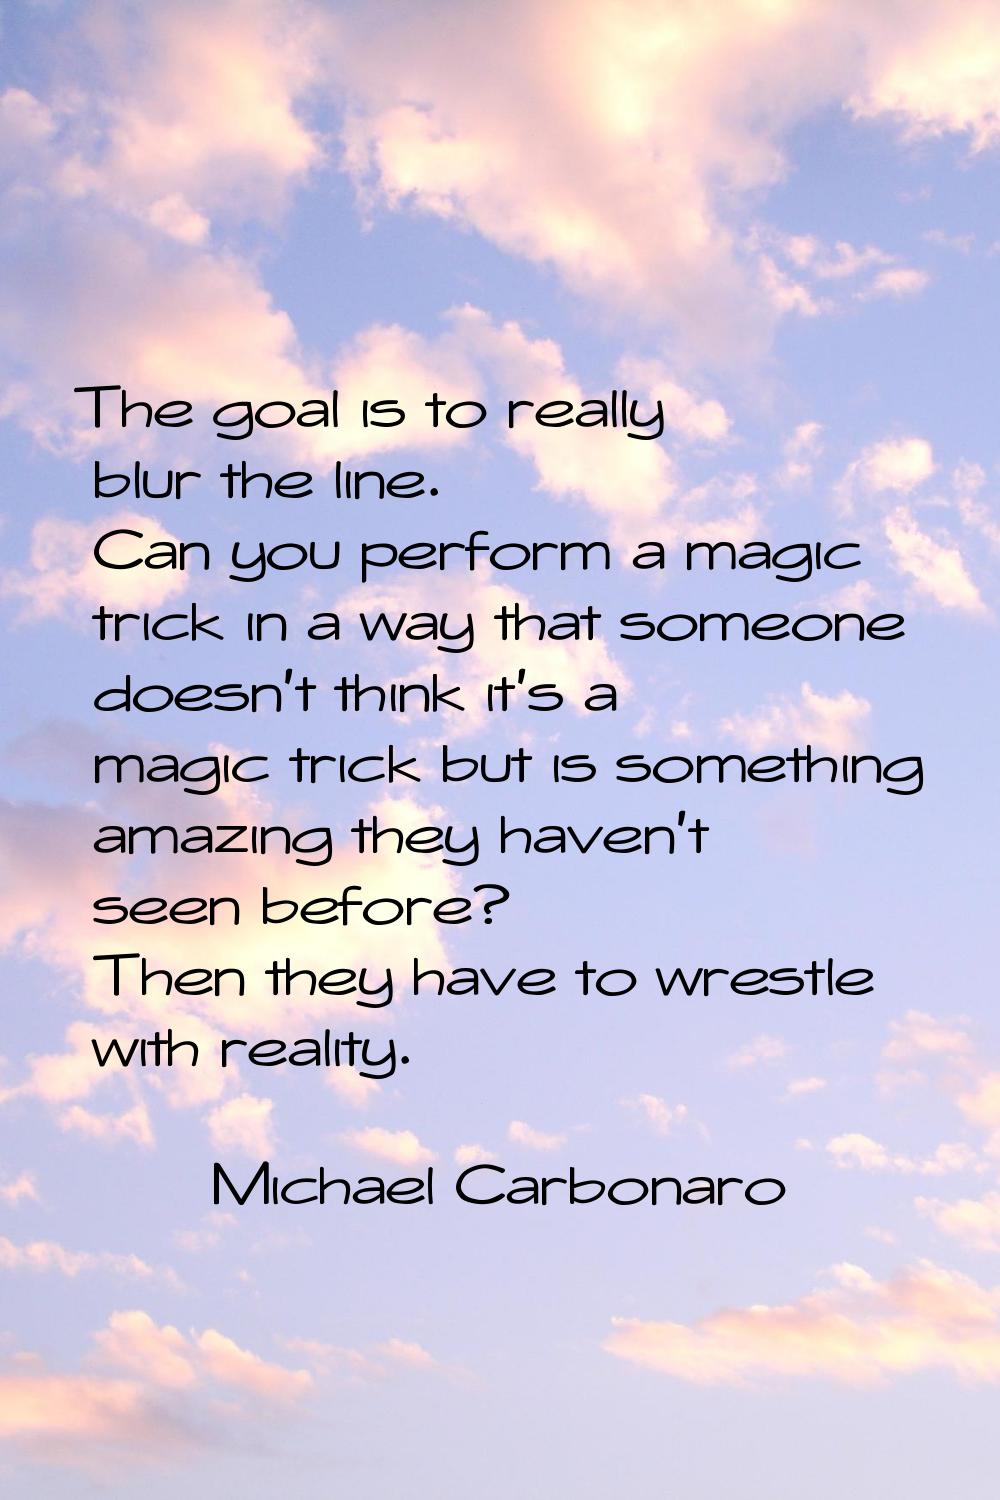 The goal is to really blur the line. Can you perform a magic trick in a way that someone doesn't th